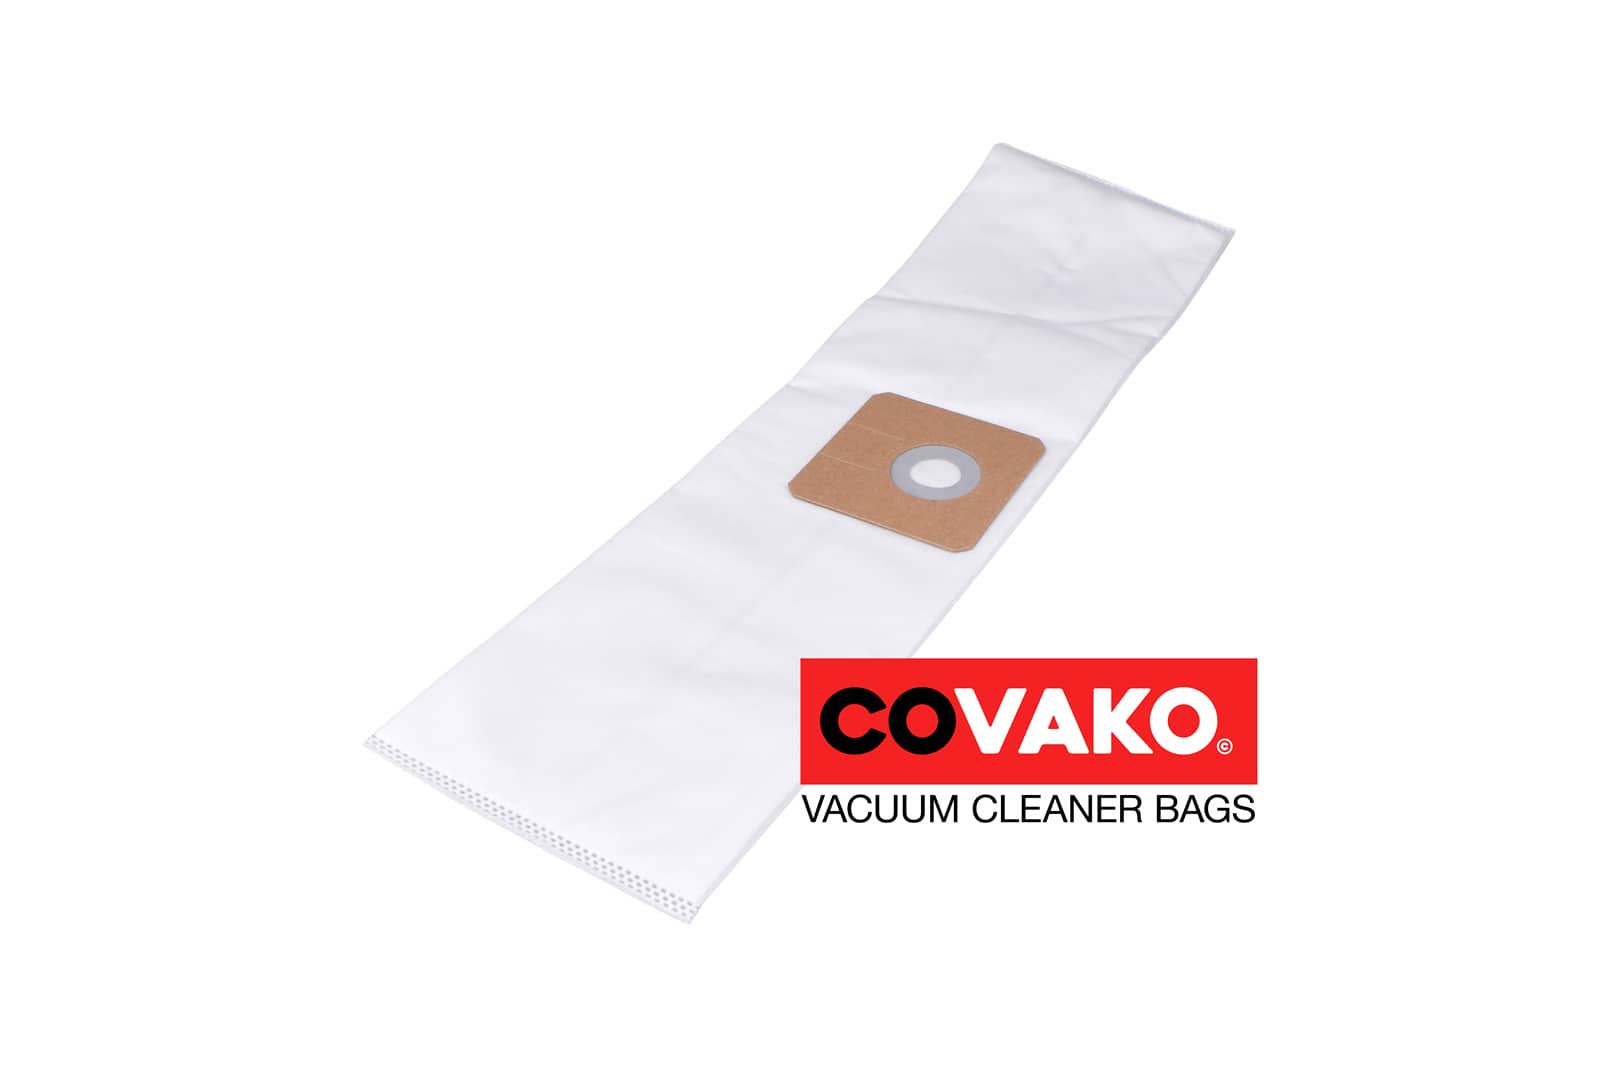 TMB Piccolo New Basic / Synthesis - TMB vacuum cleaner bags